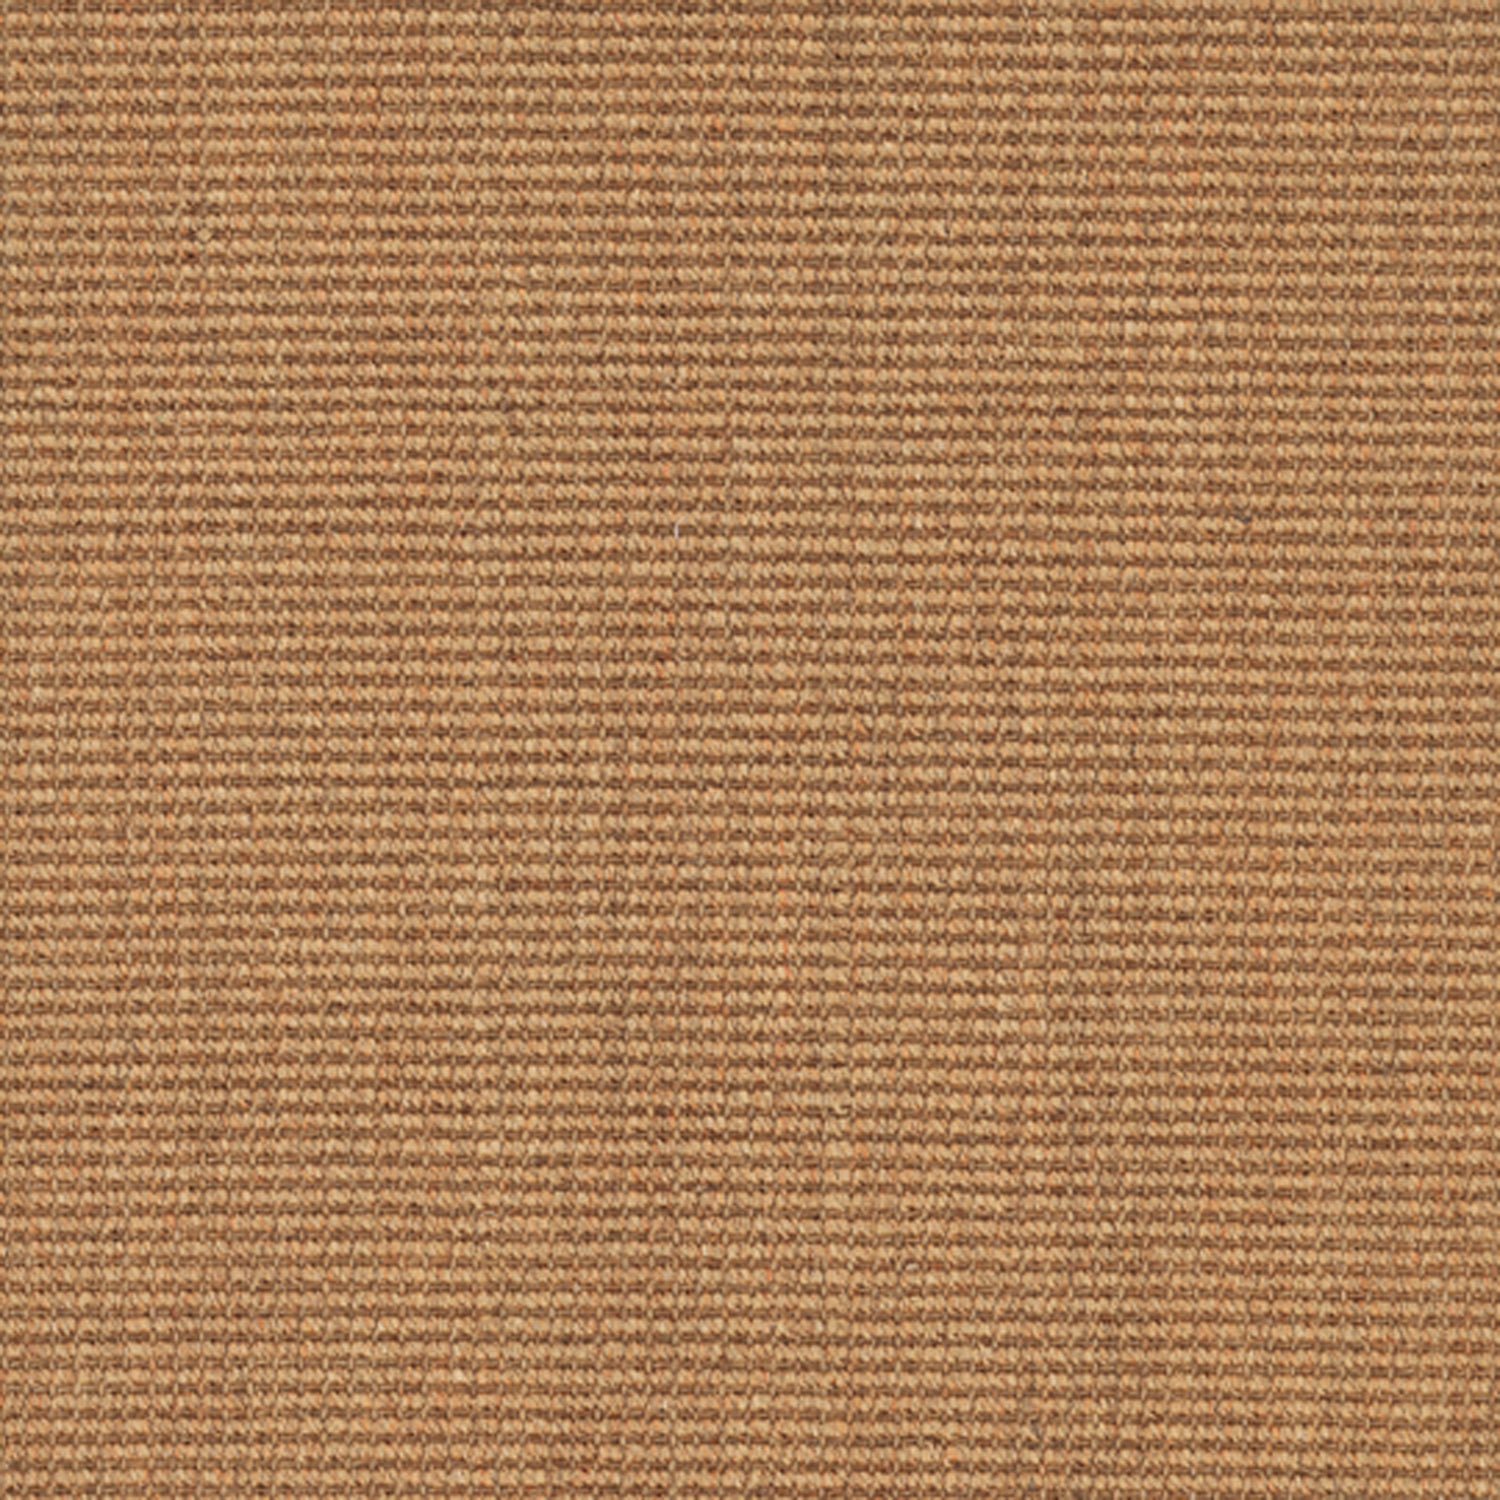 Sisal broadloom carpet swatch in a ribbed weave in bronze and brown.